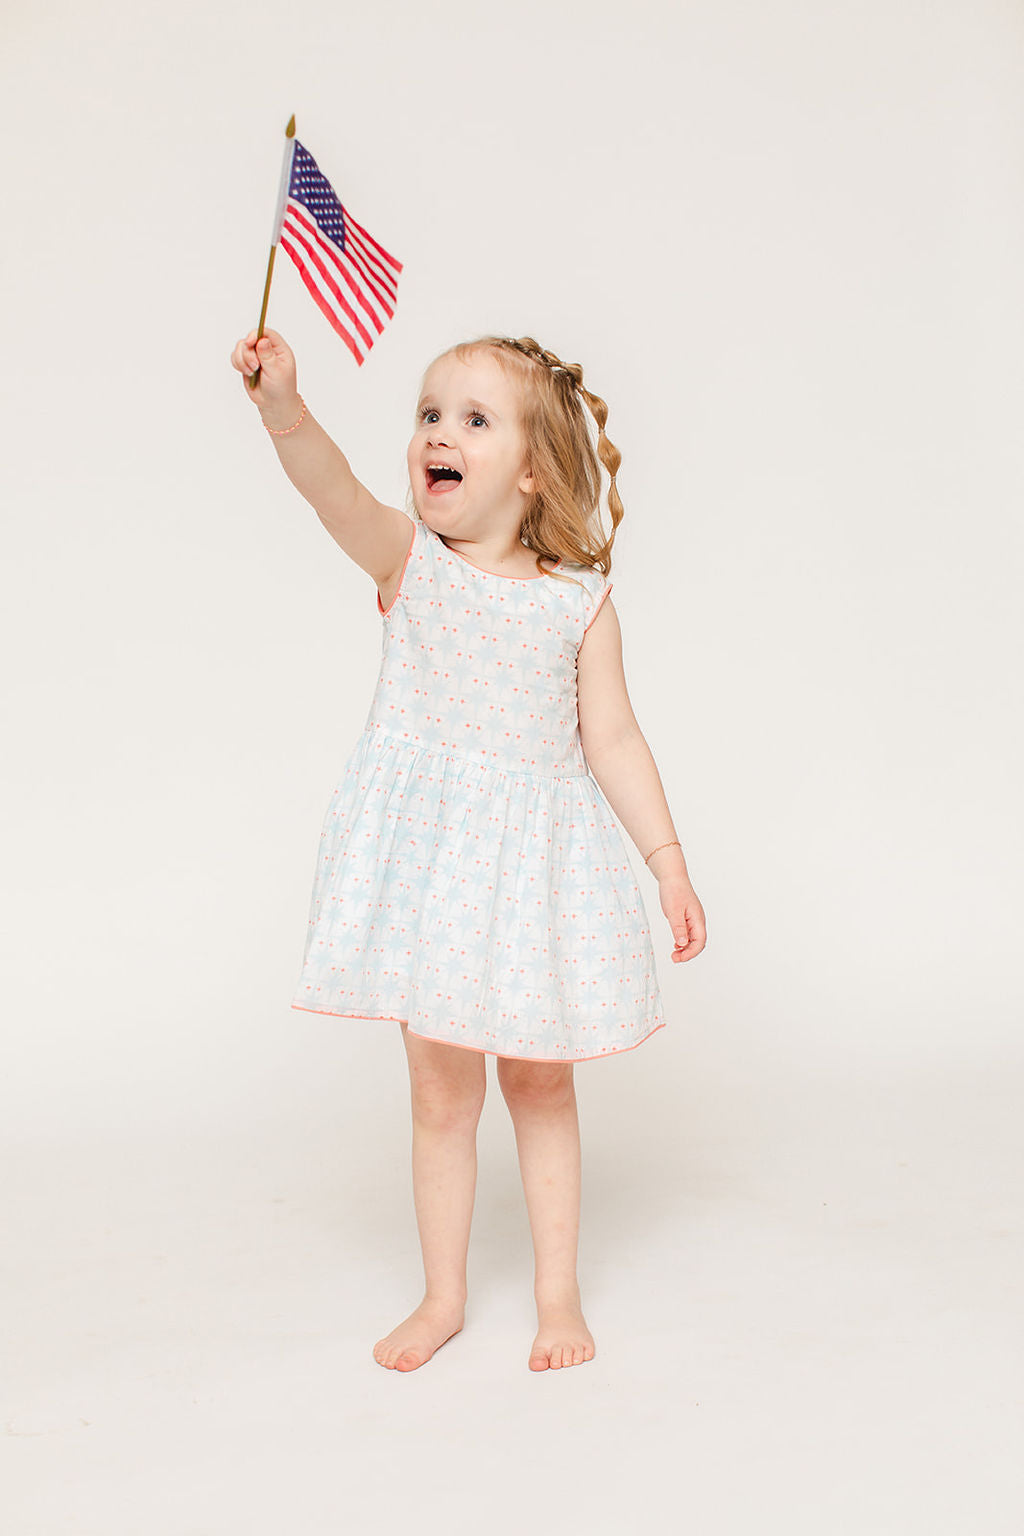 The Sully Scoop Back Dress - Star Spangled